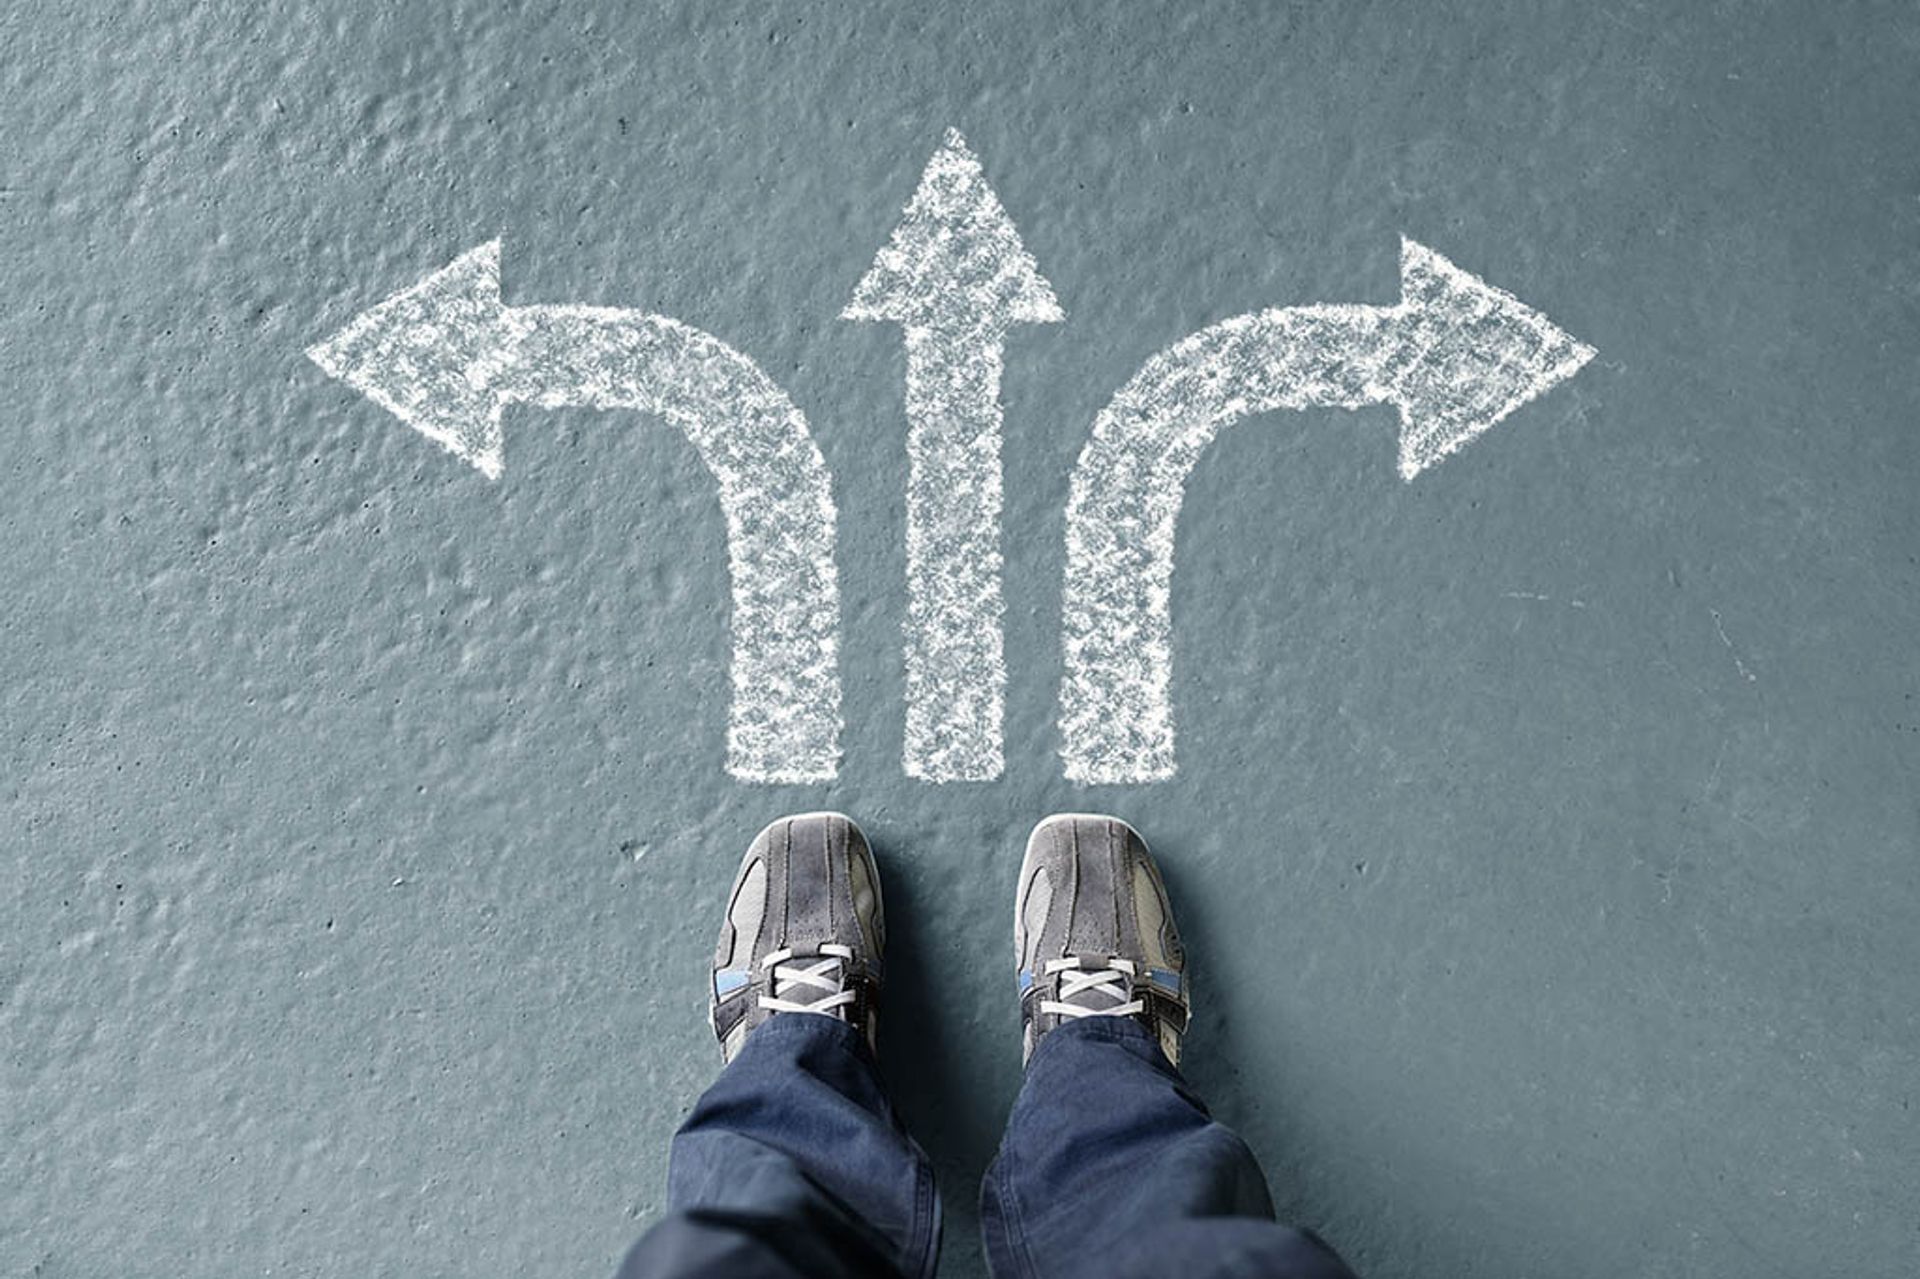 Image of a person choosing which direction to proceed in